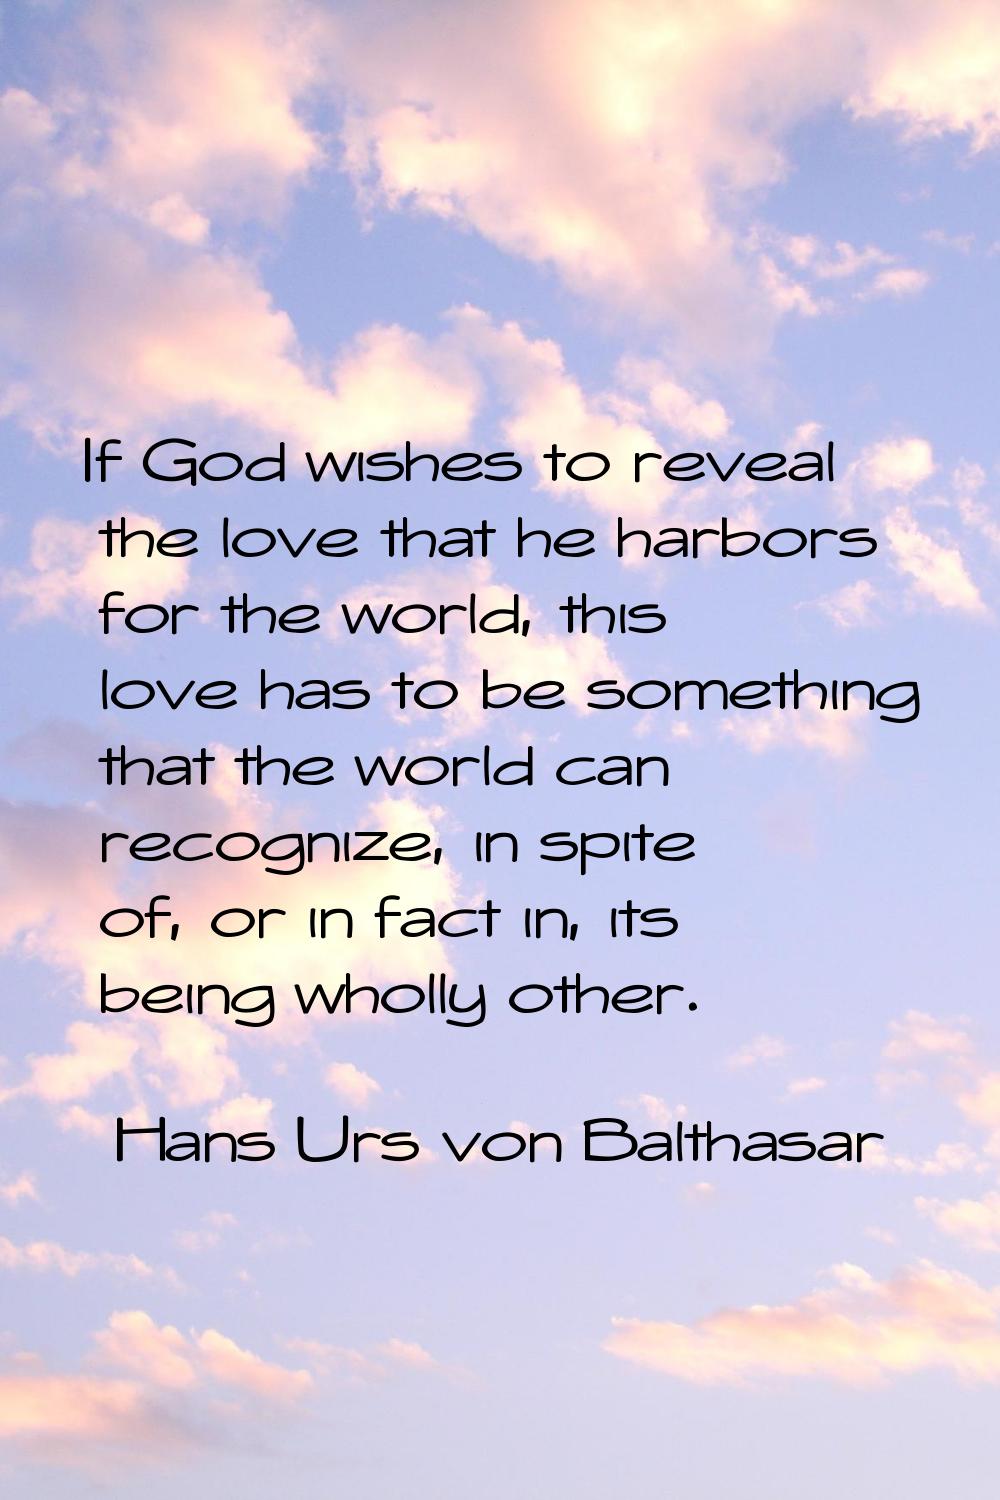 If God wishes to reveal the love that he harbors for the world, this love has to be something that 